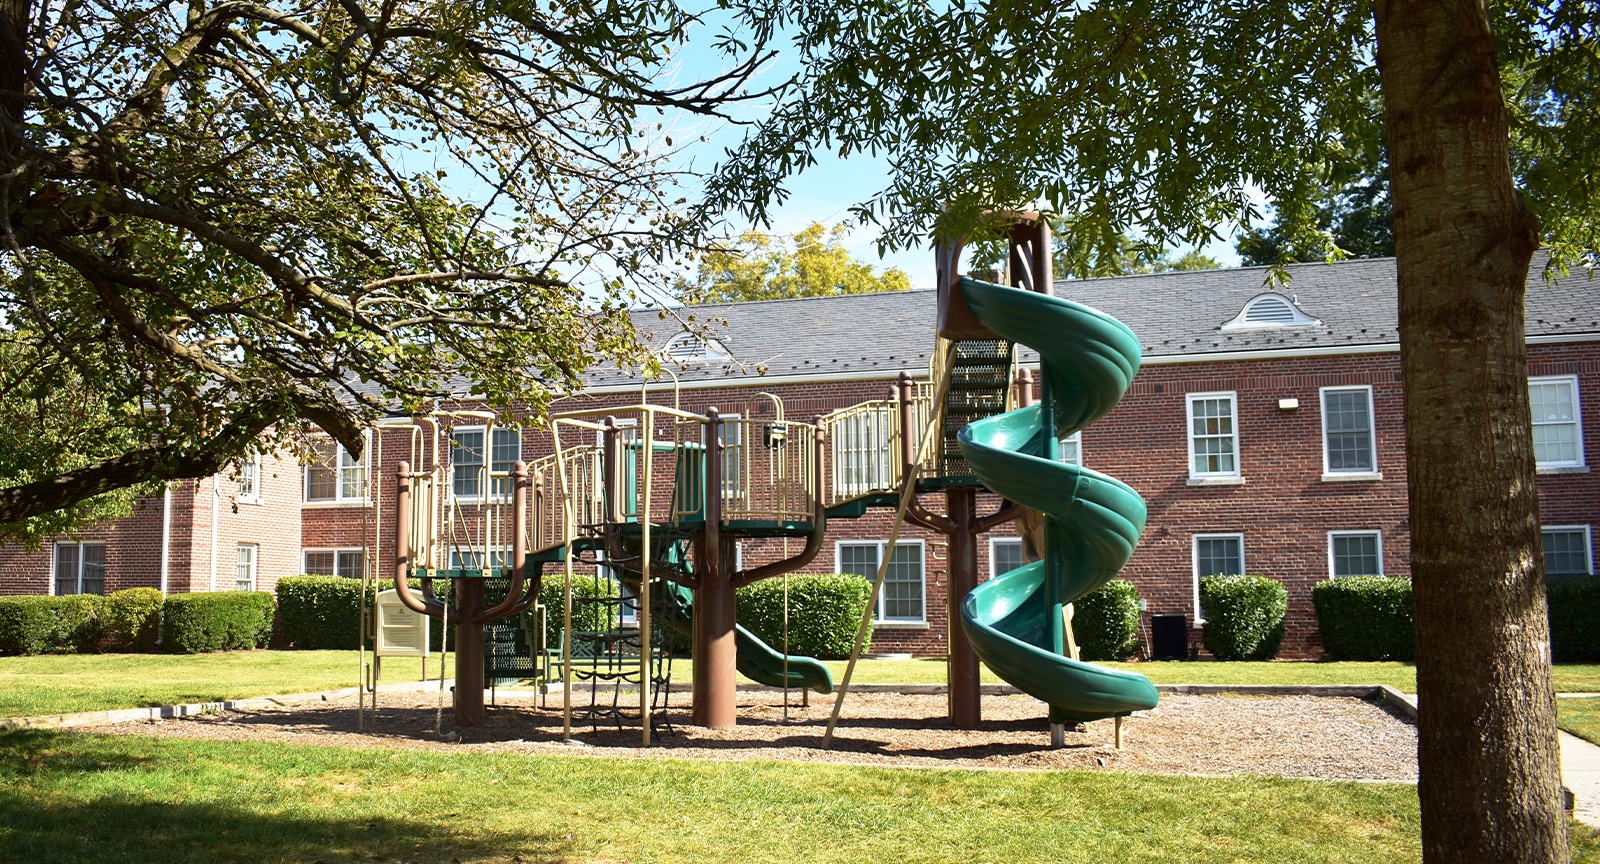 Wesley Property Home Our Communities Knightsbridge Playground